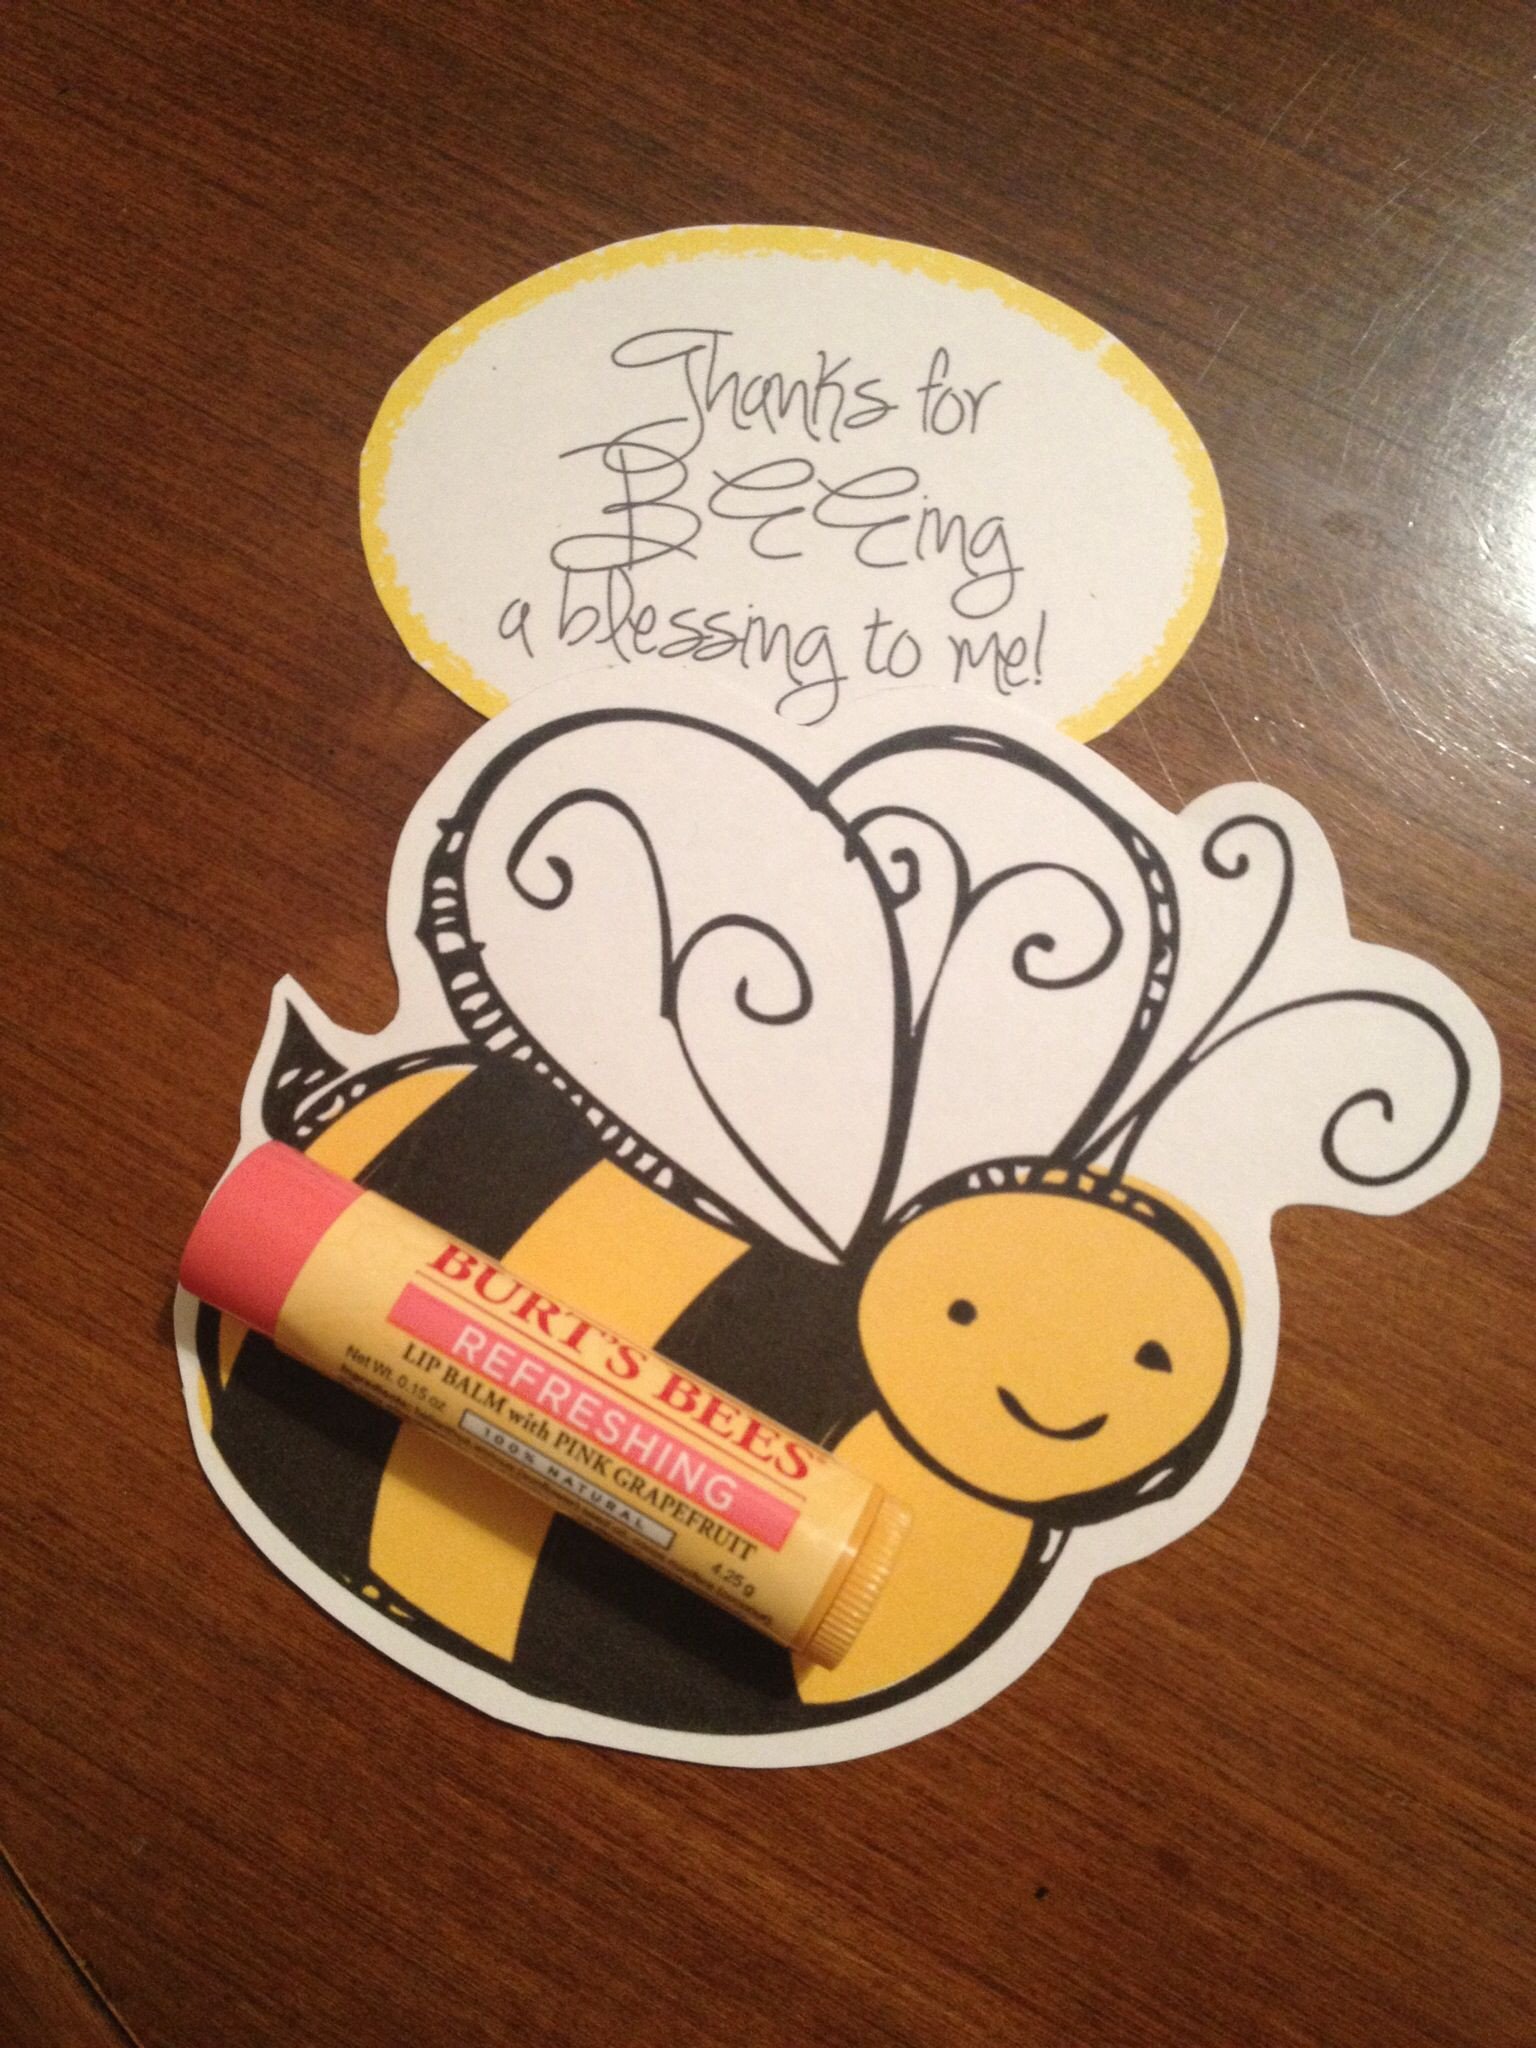 The top 21 Ideas About Thank You Gift Ideas for Coworkers Homemade